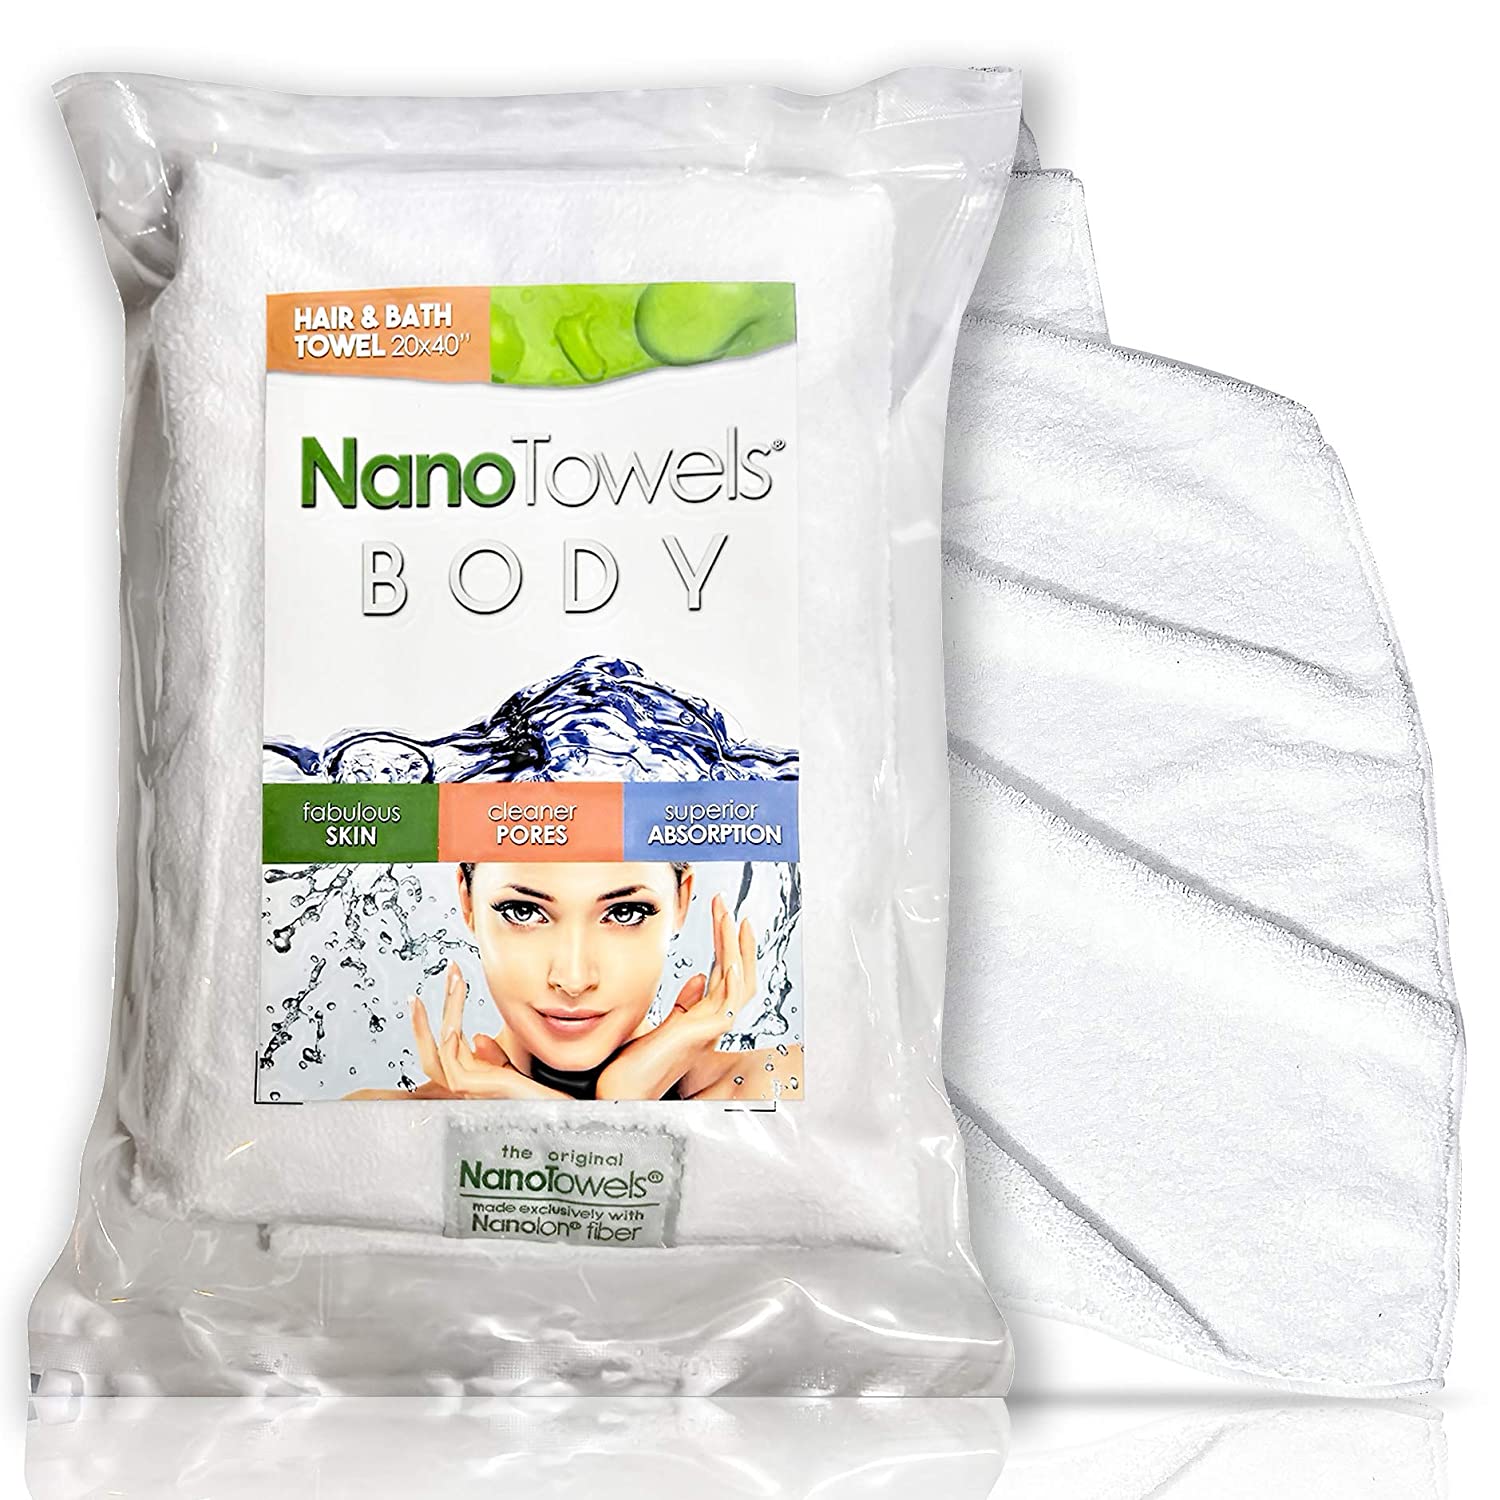 Nano Towels Body Bath & Shower Hair Towel 20x40 White - Super Absorbent. Wipes Away Dirt, Oil and Cosmetics. Use As Your Sports, Travel, Fitness, Kids, Beauty, Spa or Solon Luxury Towel - image 1 of 4